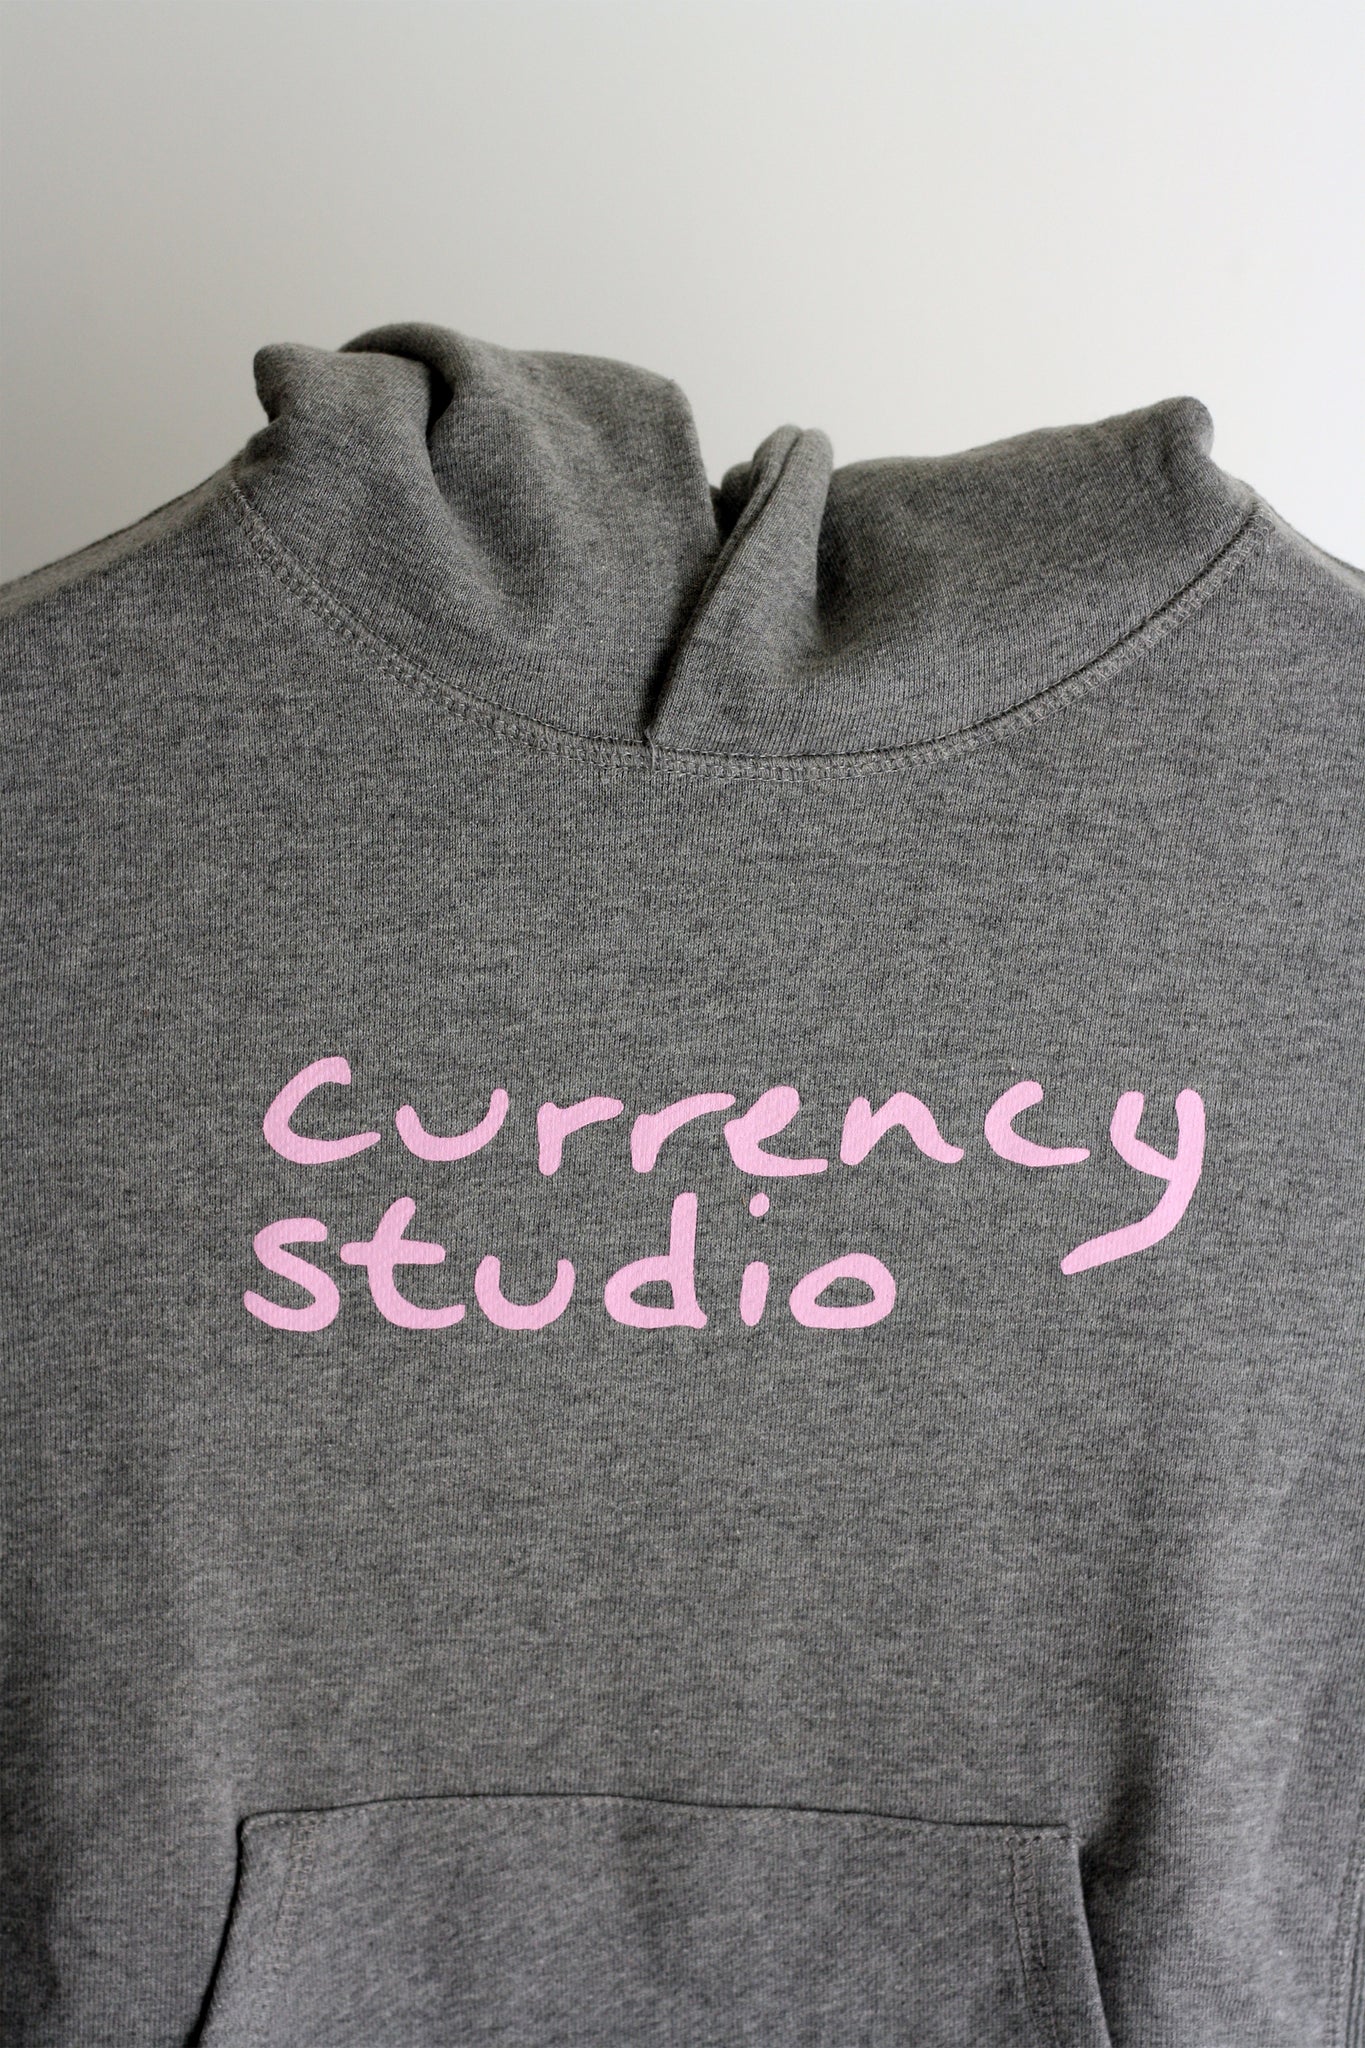 CURRENCY STUDIO BY HAND PULLOVER